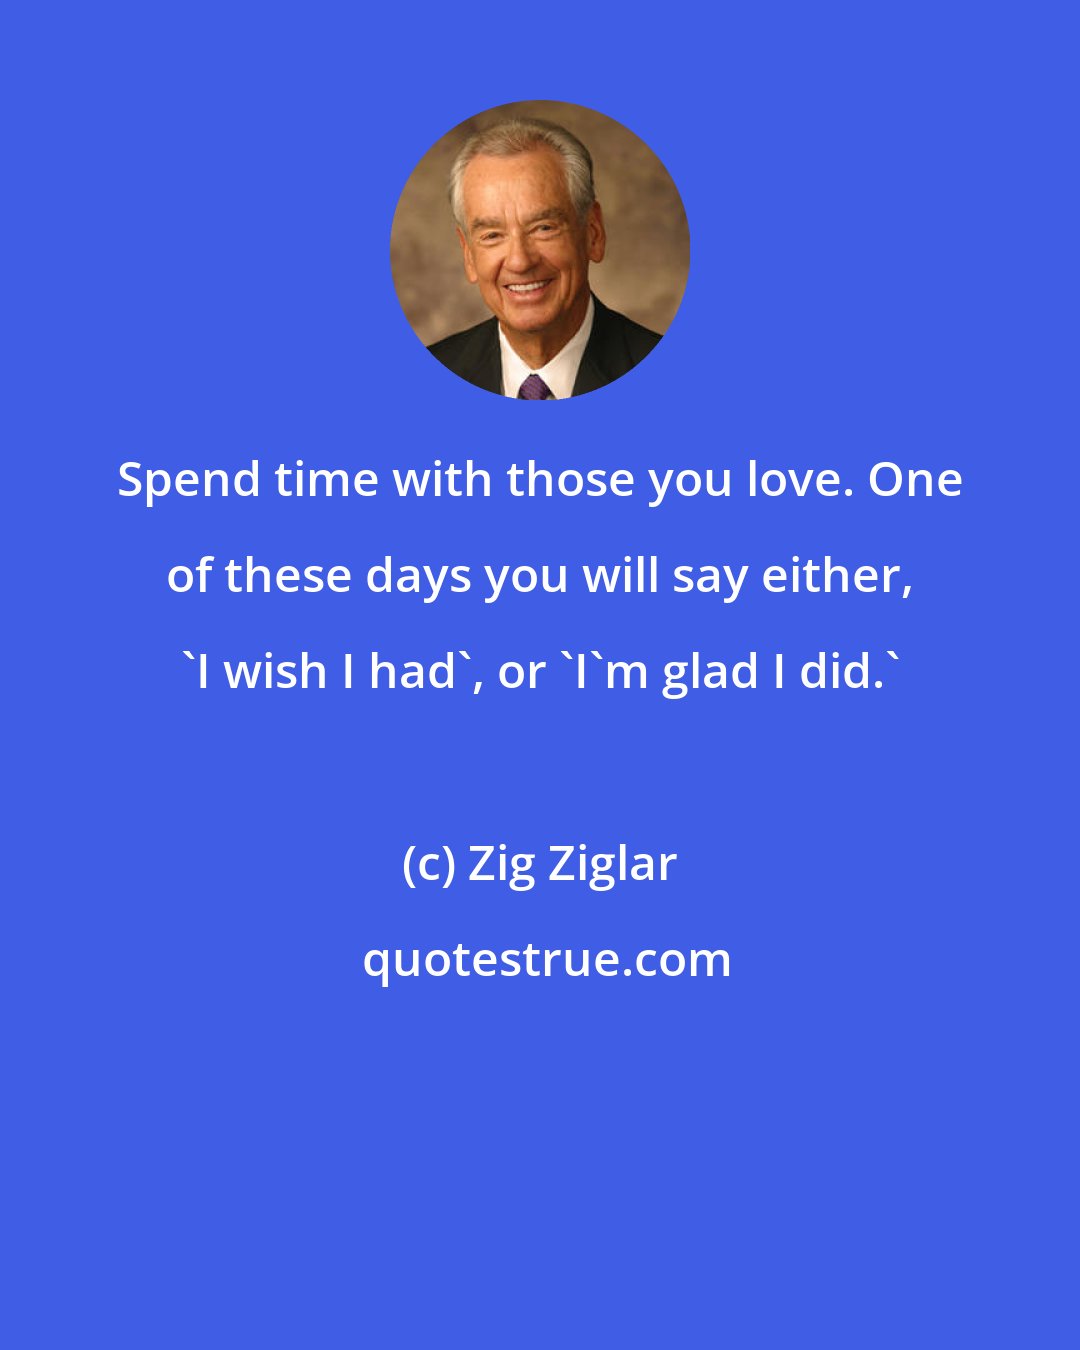 Zig Ziglar: Spend time with those you love. One of these days you will say either, 'I wish I had', or 'I'm glad I did.'